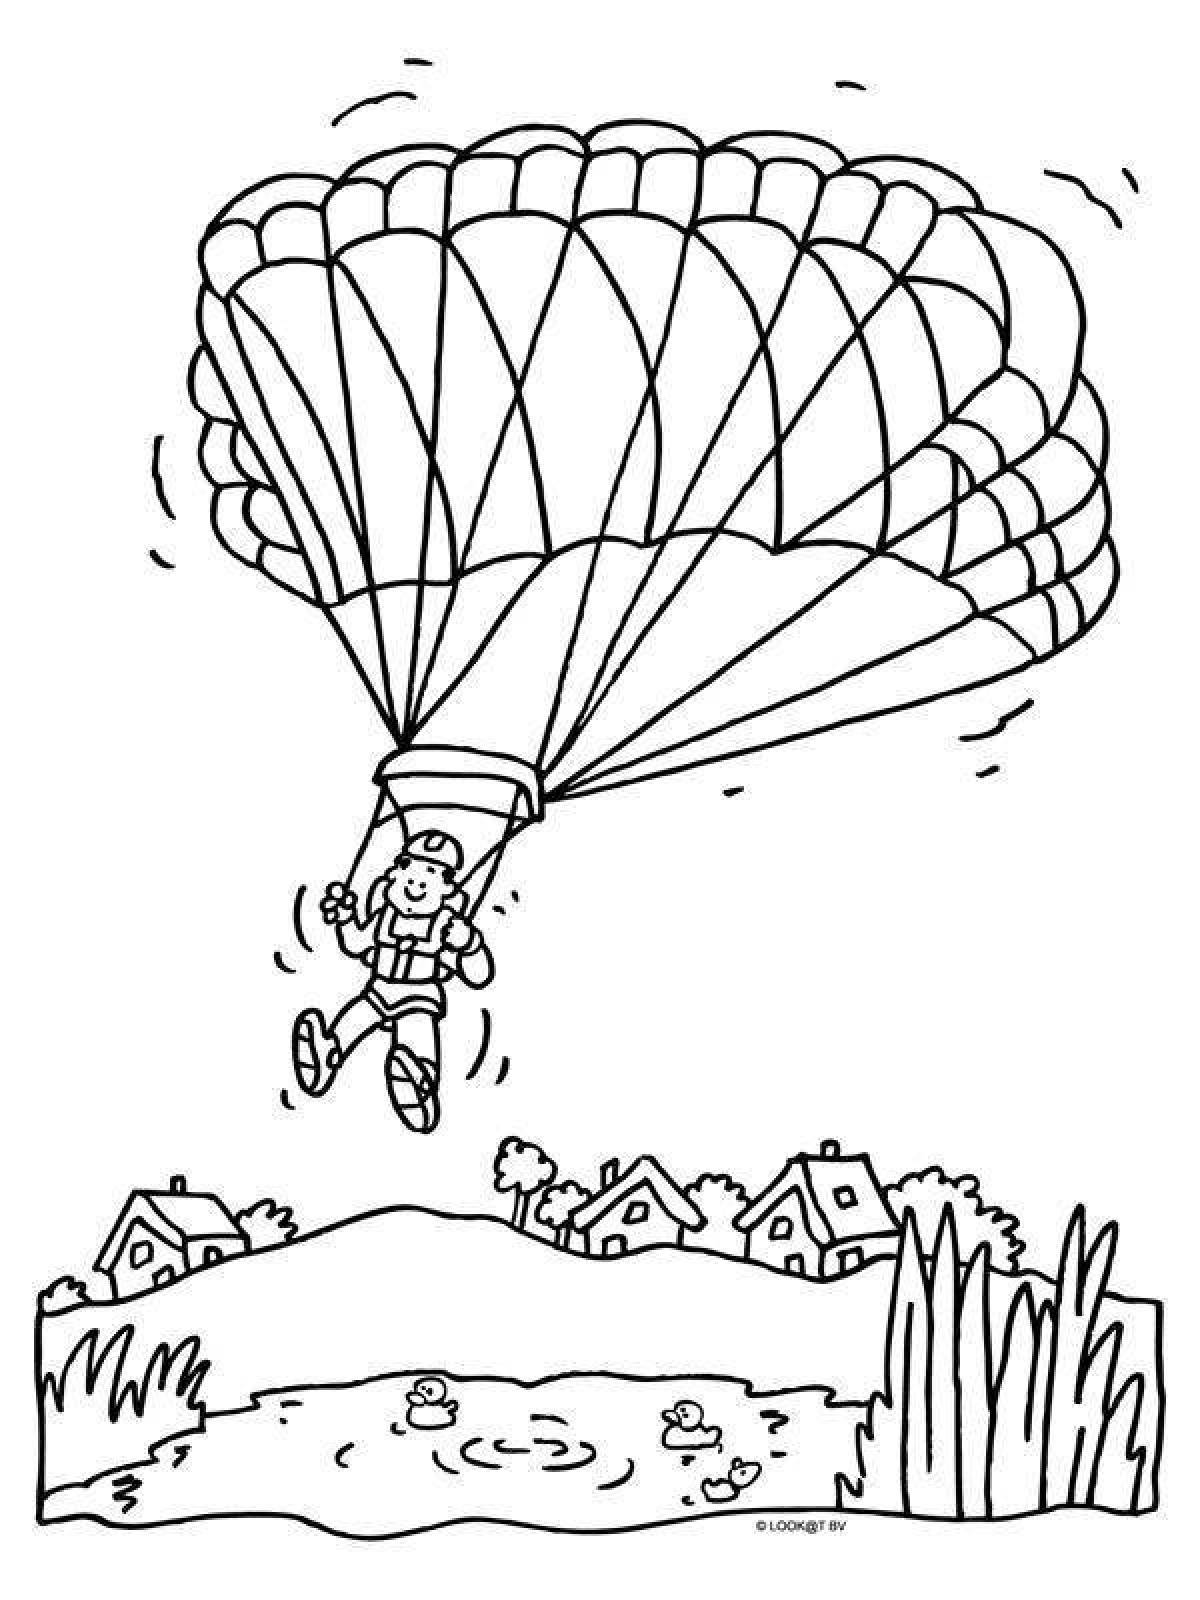 Skydiver live coloring page